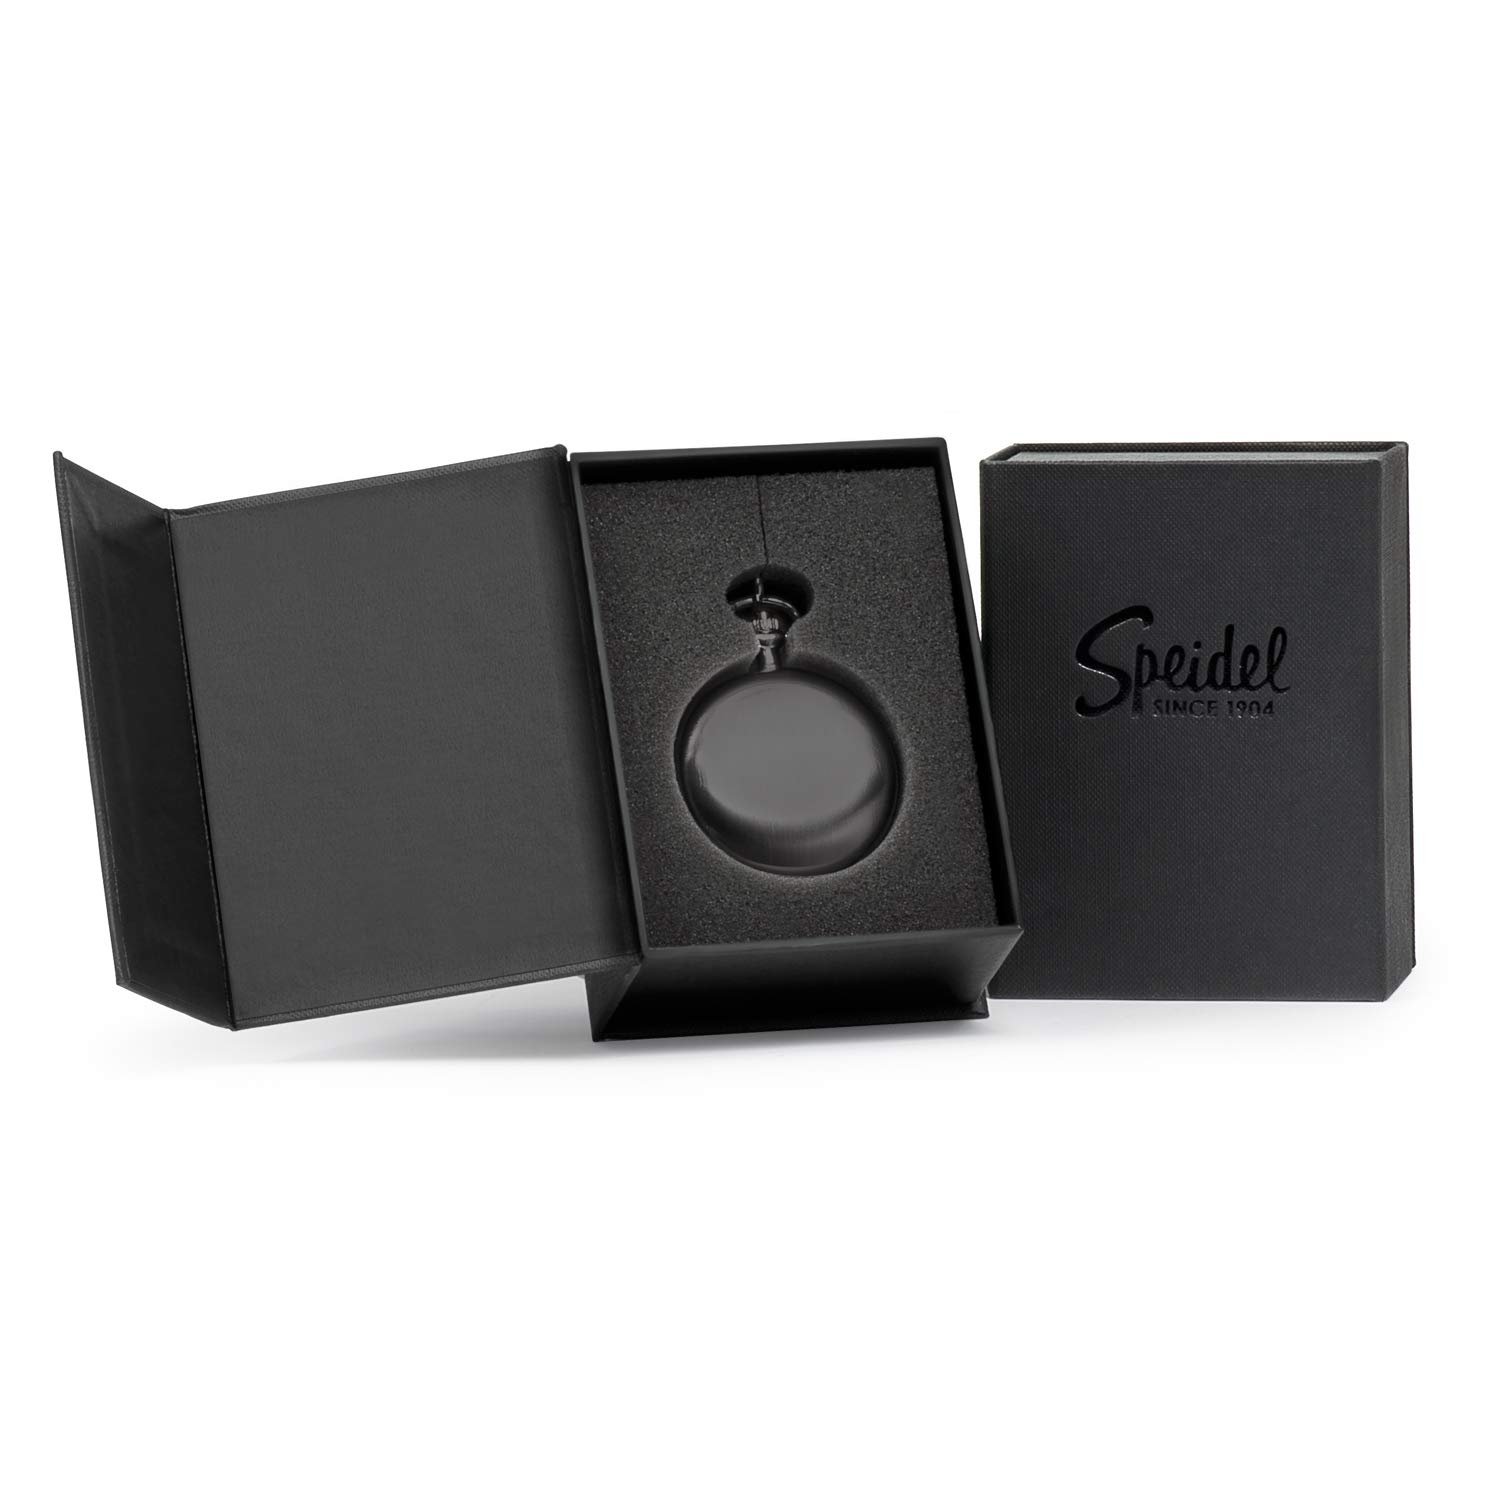 Speidel Classic Brushed Satin Engravable Pocket Watch with 14